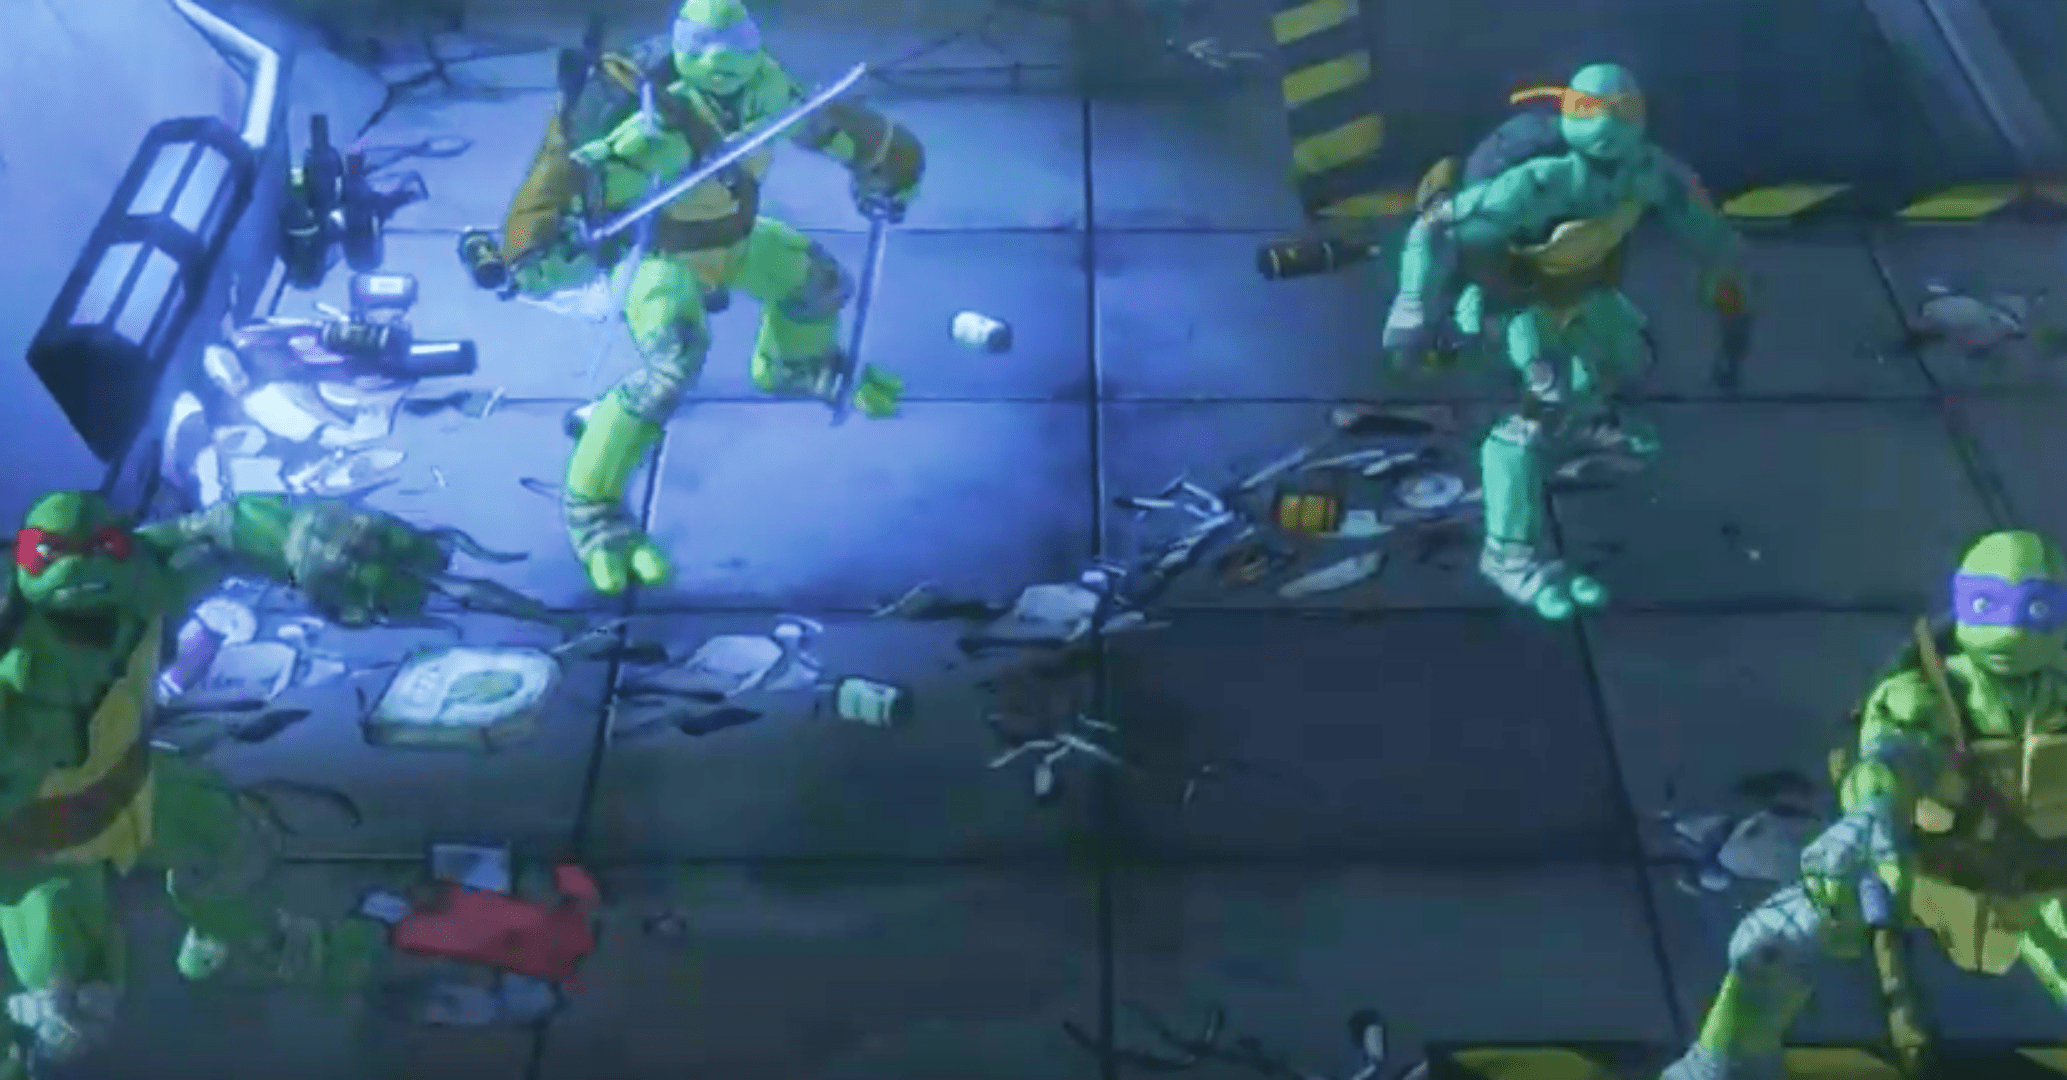 New Trailer Shows Off The Scale Of The New TMNT Game!